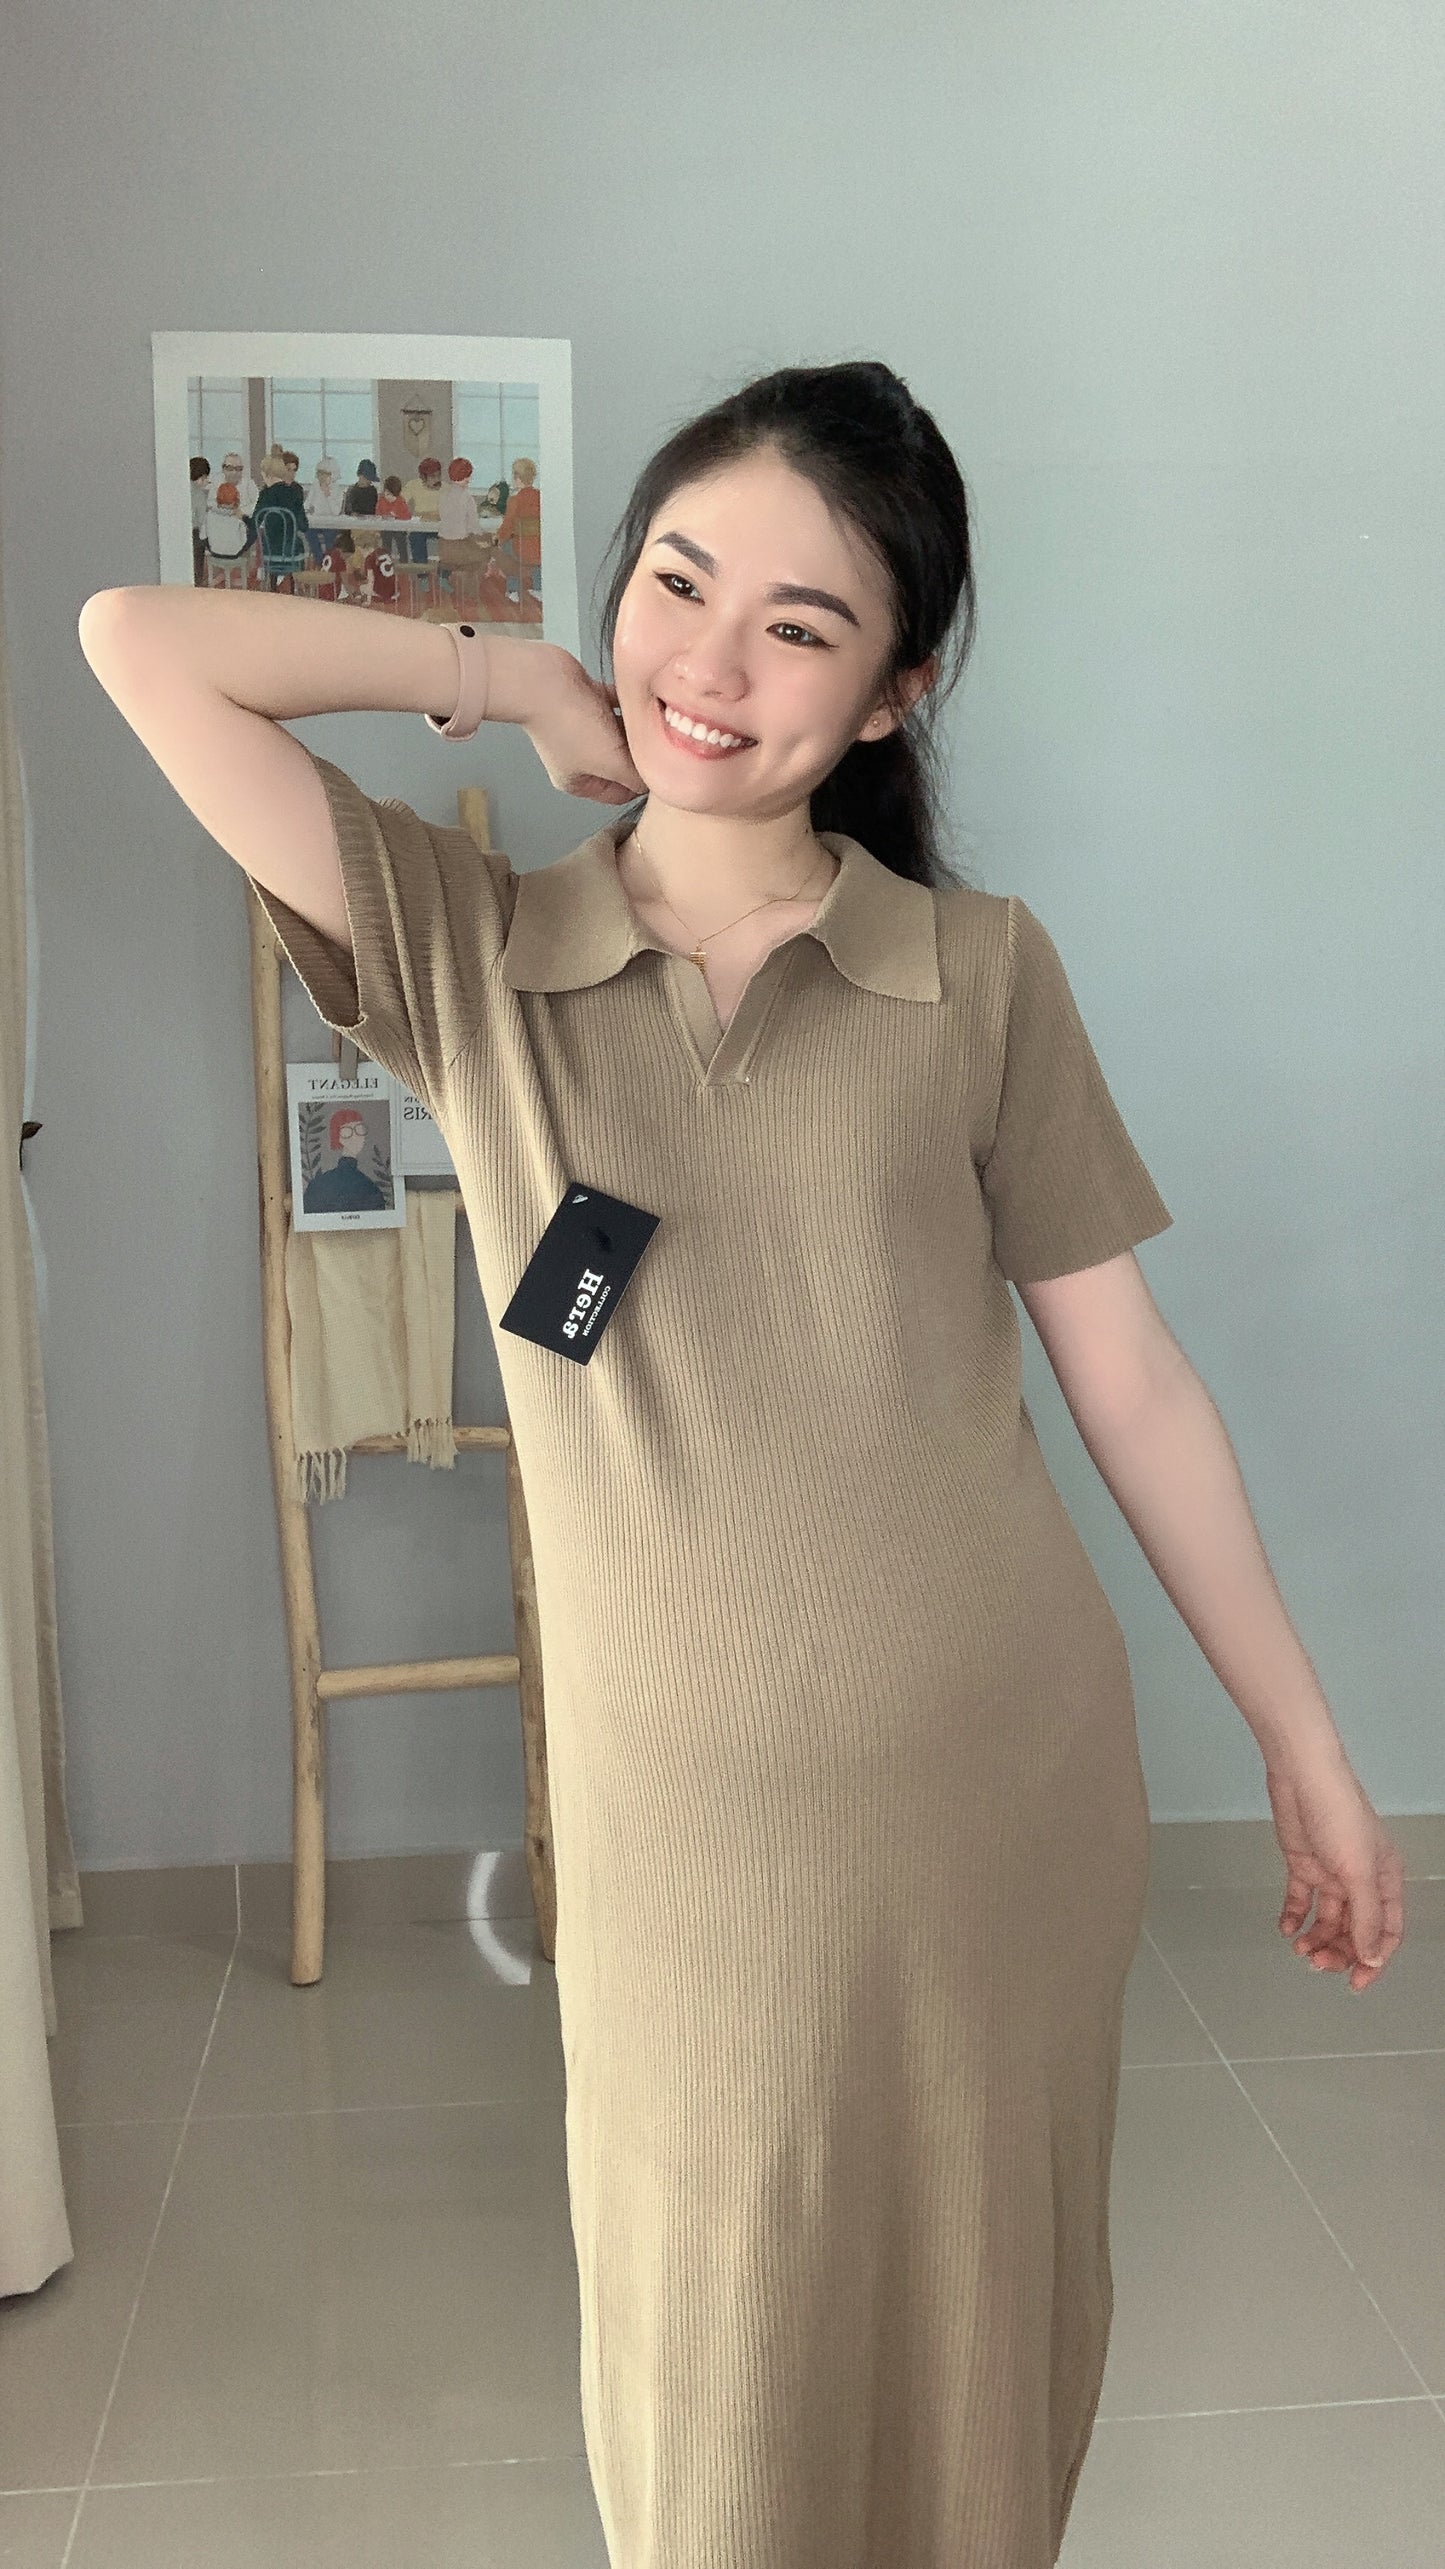 Leon Collared Stretchy Knits Dress